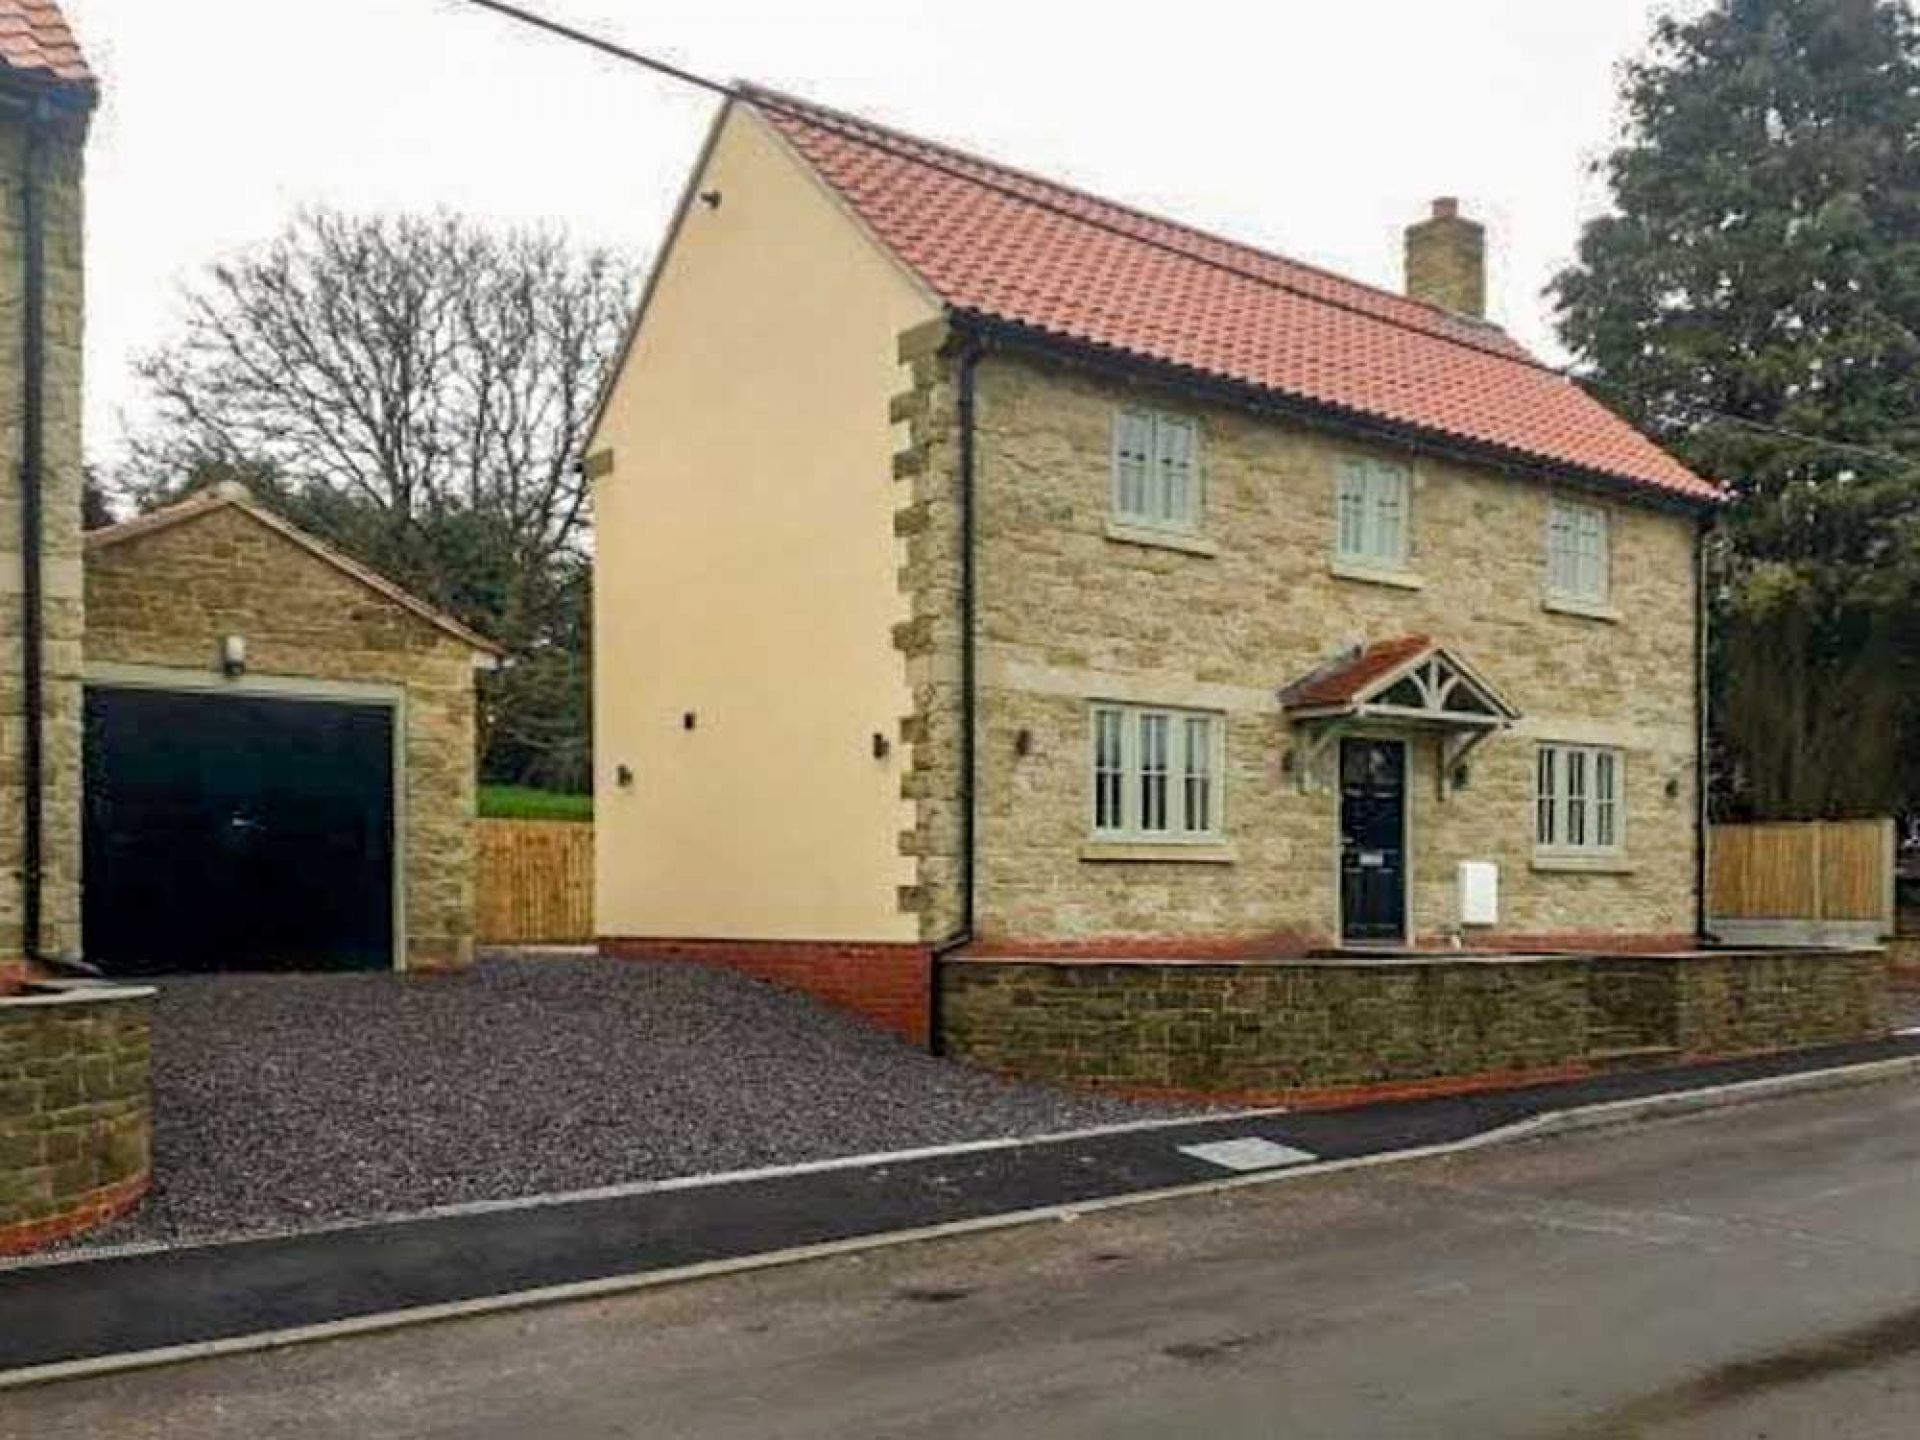 New detached house completed with garage.